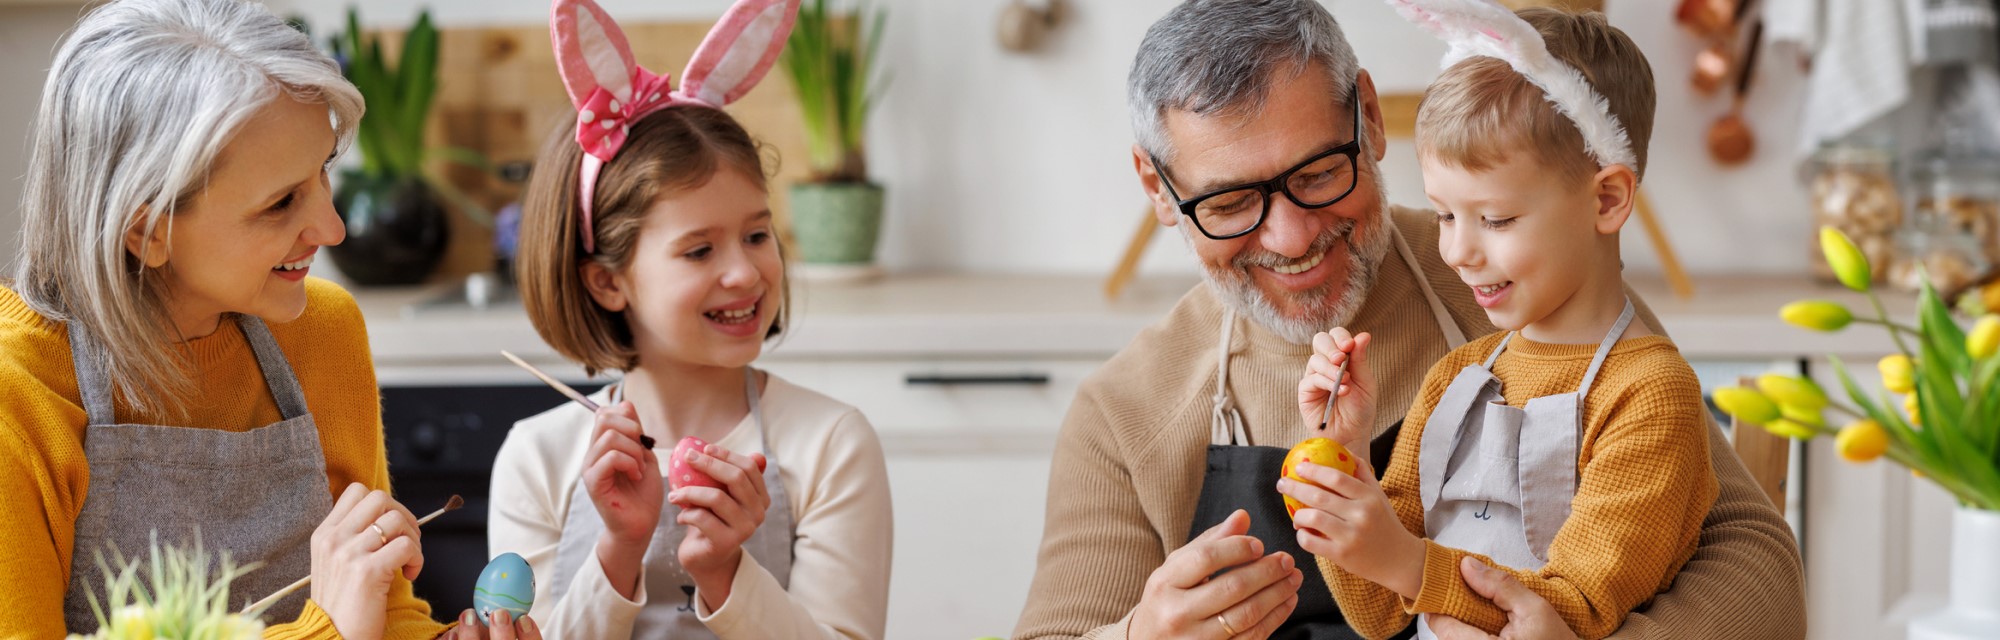 10 Easter crafts and activities for families